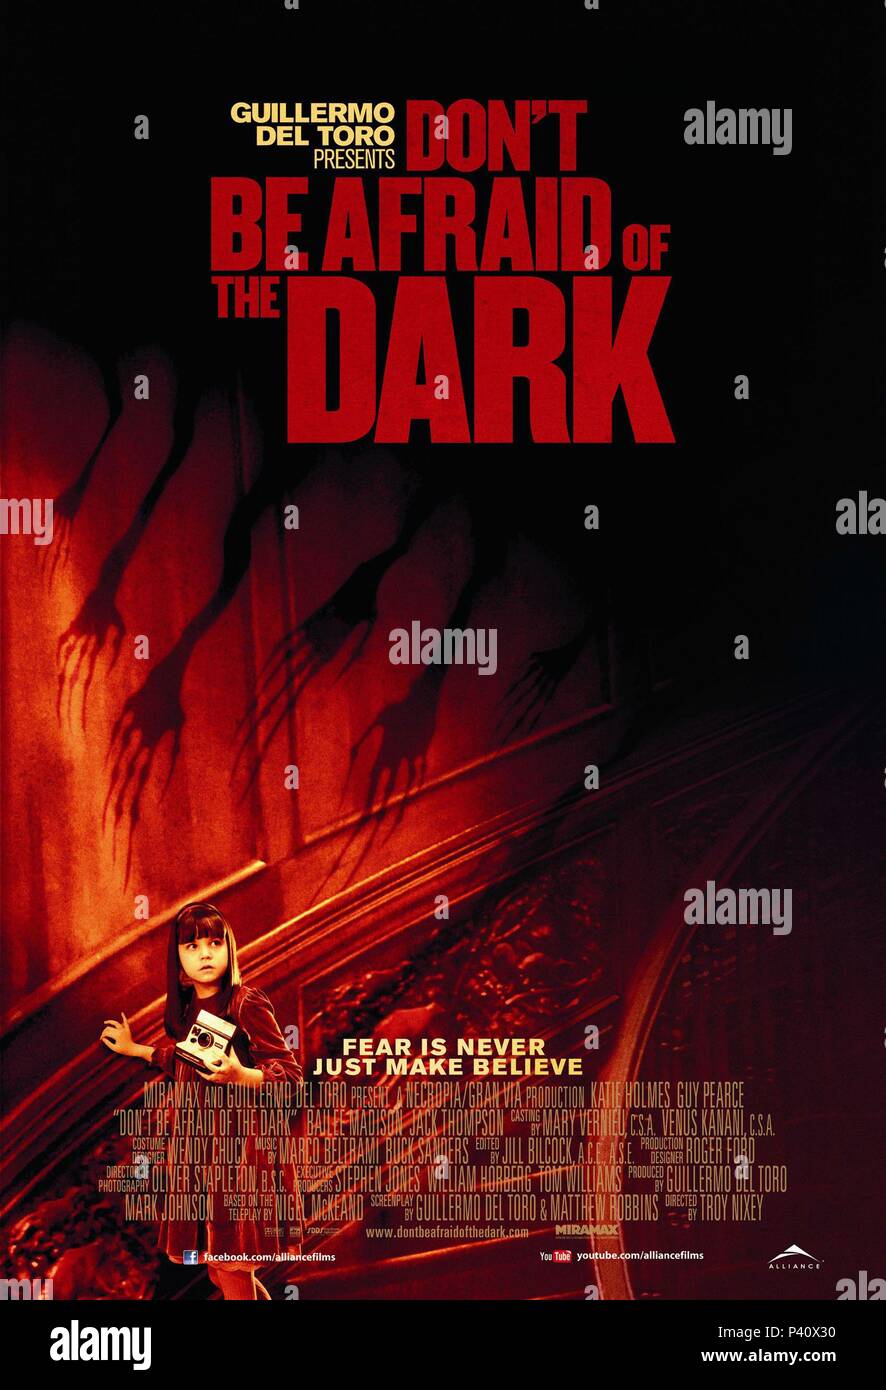 Original Film Title: DON'T BE AFRAID OF THE DARK.  English Title: DON'T BE AFRAID OF THE DARK.  Film Director: TROY NIXEY.  Year: 2010. Credit: MIRAMAX FILMS / Album Stock Photo